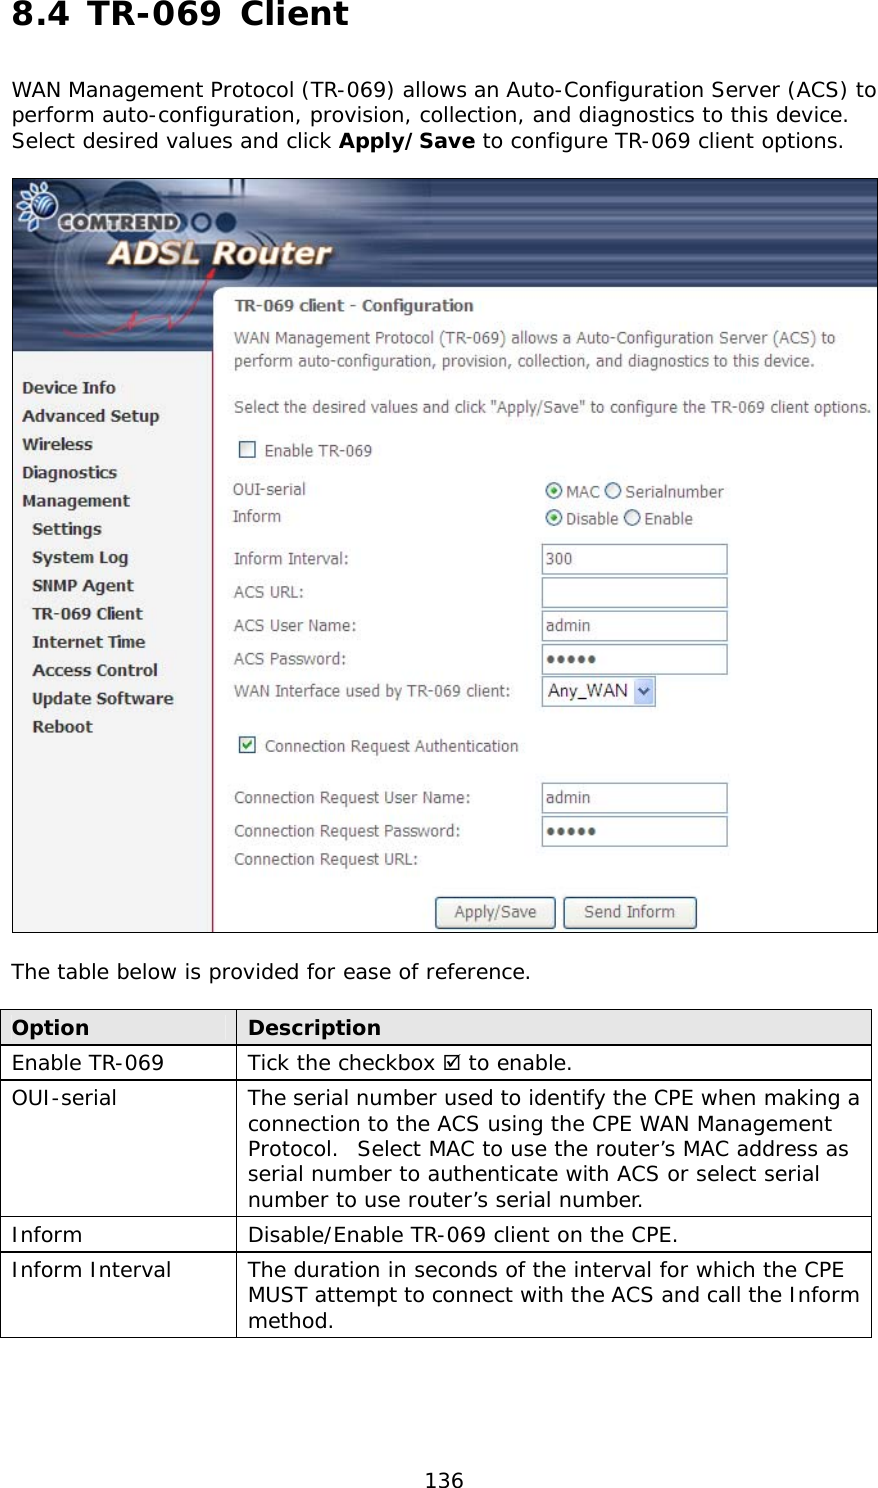  136 8.4 TR-069 Client  WAN Management Protocol (TR-069) allows an Auto-Configuration Server (ACS) to perform auto-configuration, provision, collection, and diagnostics to this device.  Select desired values and click Apply/Save to configure TR-069 client options.    The table below is provided for ease of reference.  Option  Description Enable TR-069  Tick the checkbox  to enable. OUI-serial  The serial number used to identify the CPE when making a connection to the ACS using the CPE WAN Management Protocol.  Select MAC to use the router’s MAC address as serial number to authenticate with ACS or select serial number to use router’s serial number. Inform  Disable/Enable TR-069 client on the CPE. Inform Interval  The duration in seconds of the interval for which the CPE MUST attempt to connect with the ACS and call the Inform method. 